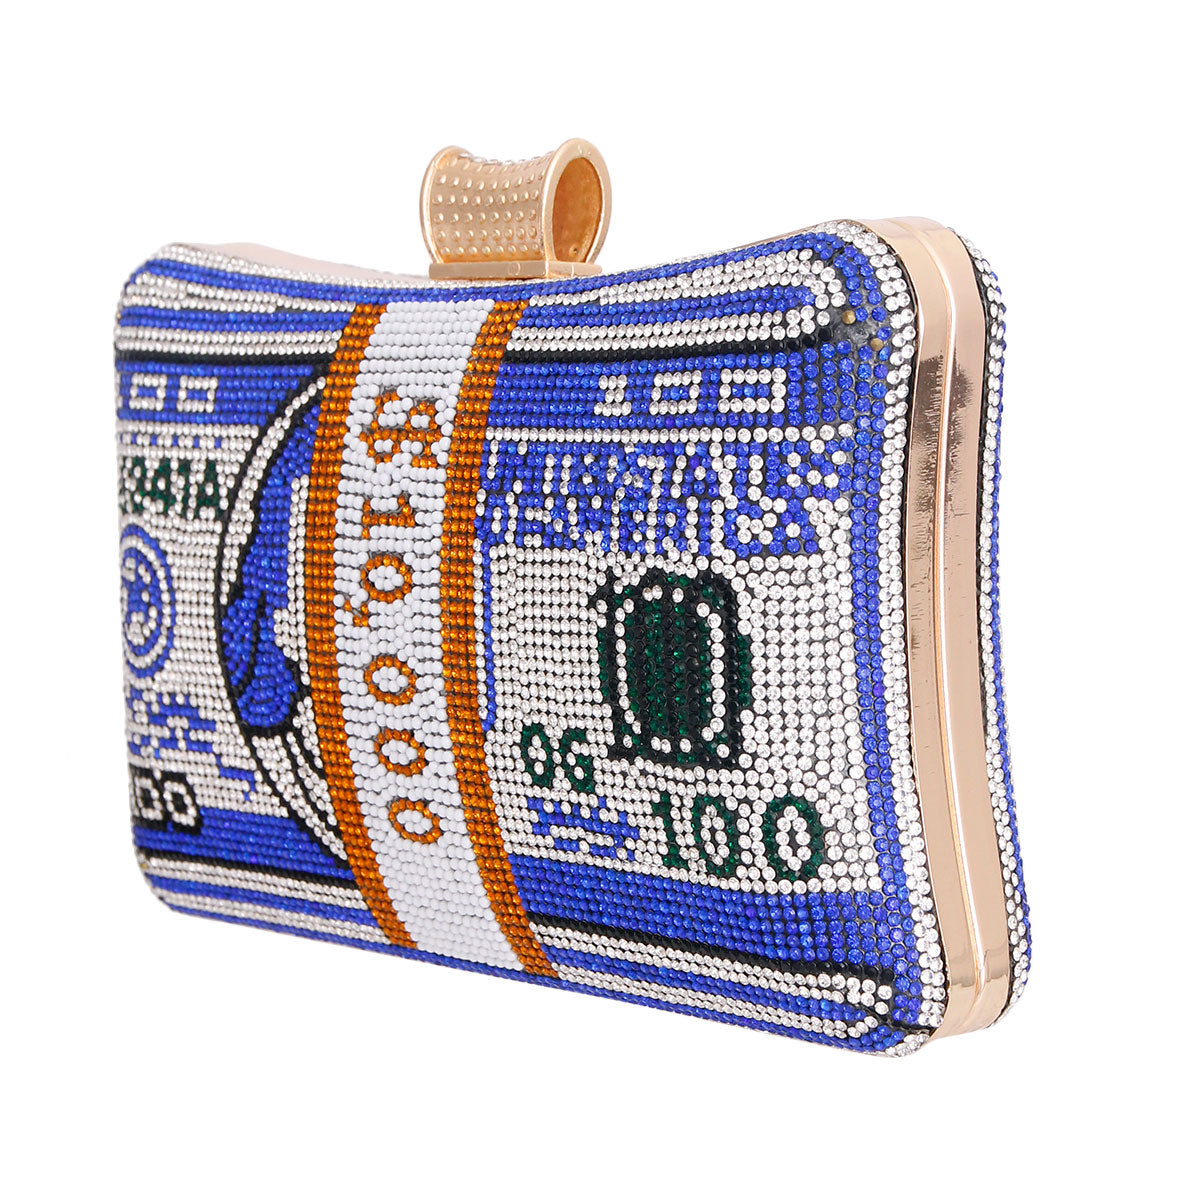 Blue Bling Banded Cash Luxury Clutch